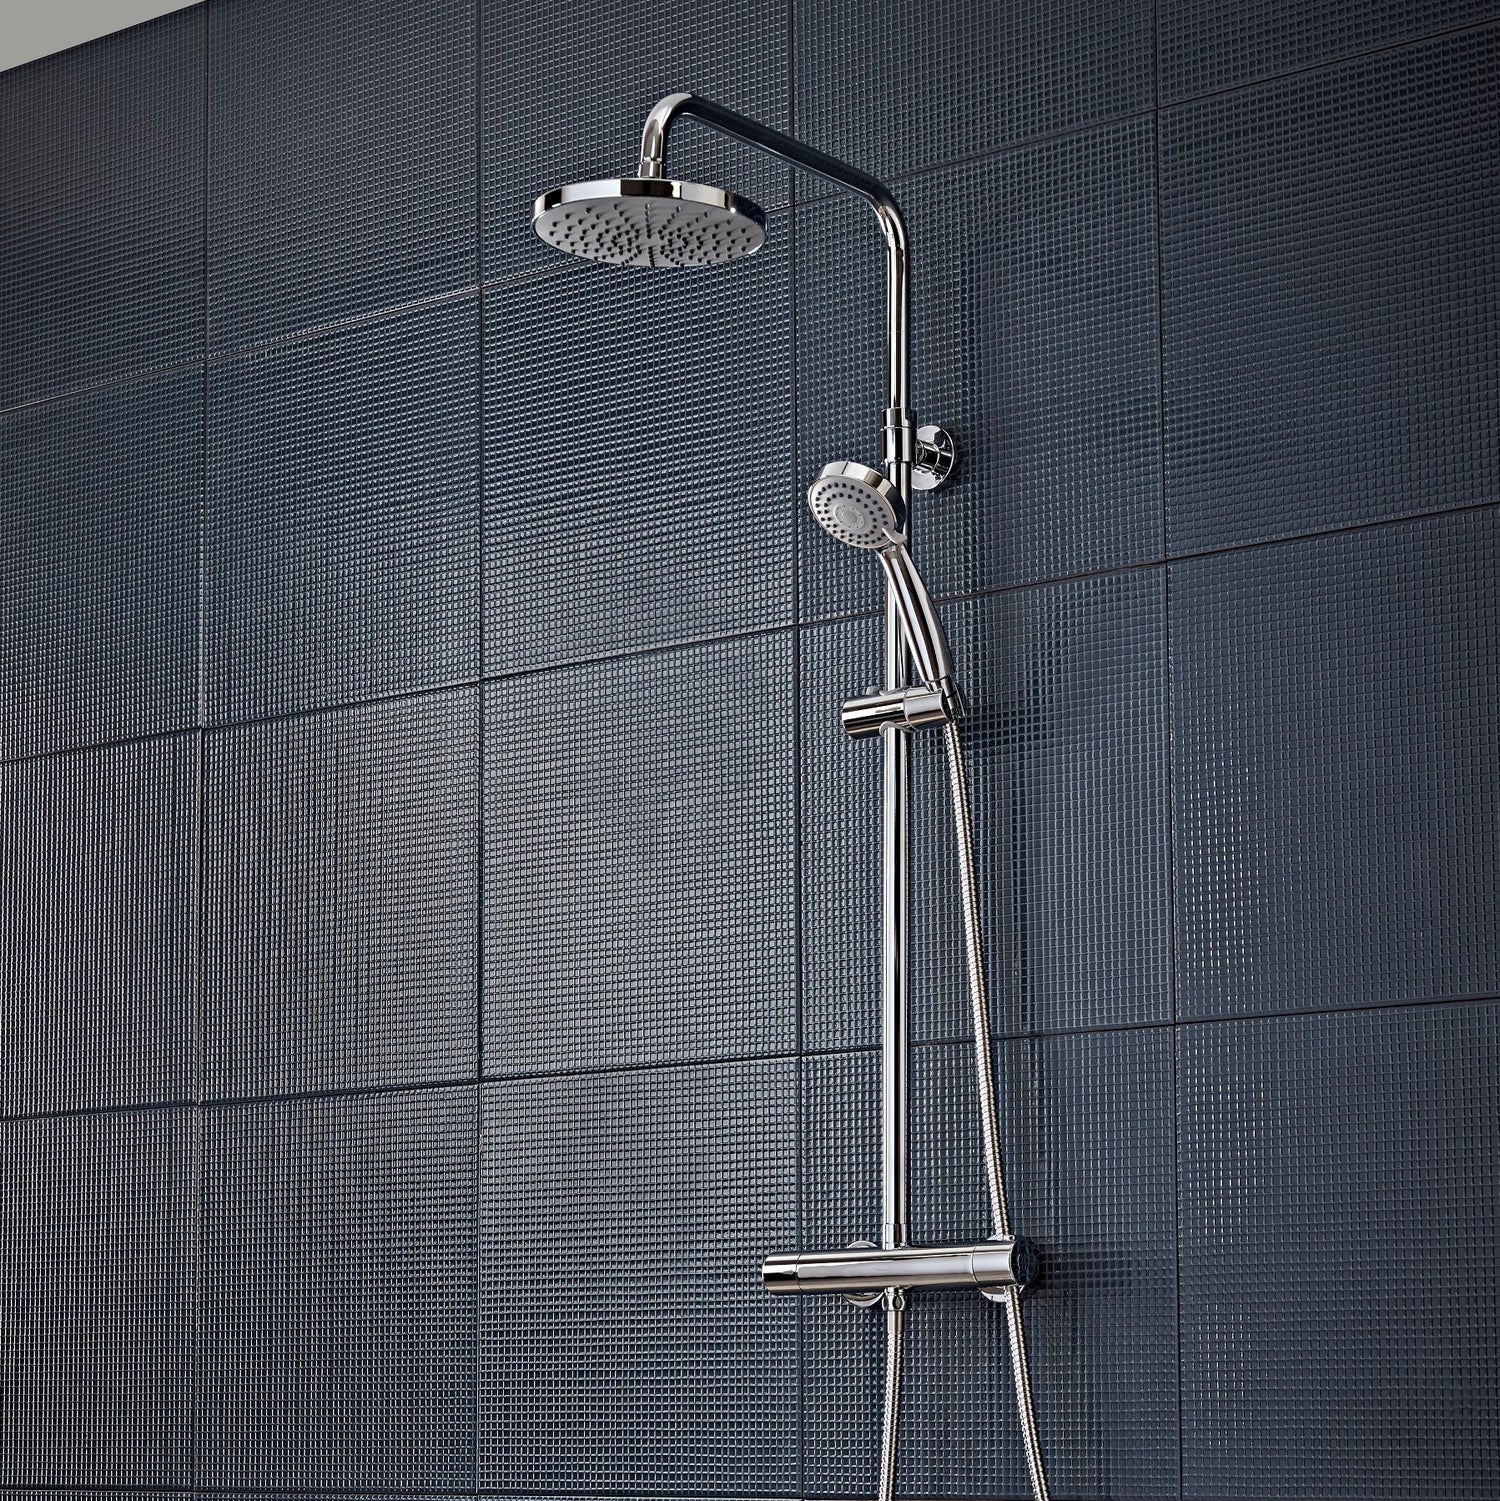 Tavistock Merit Round Exposed Bar Shower System with Fixed Head and Handset against dark blue tiled wall SMT1509